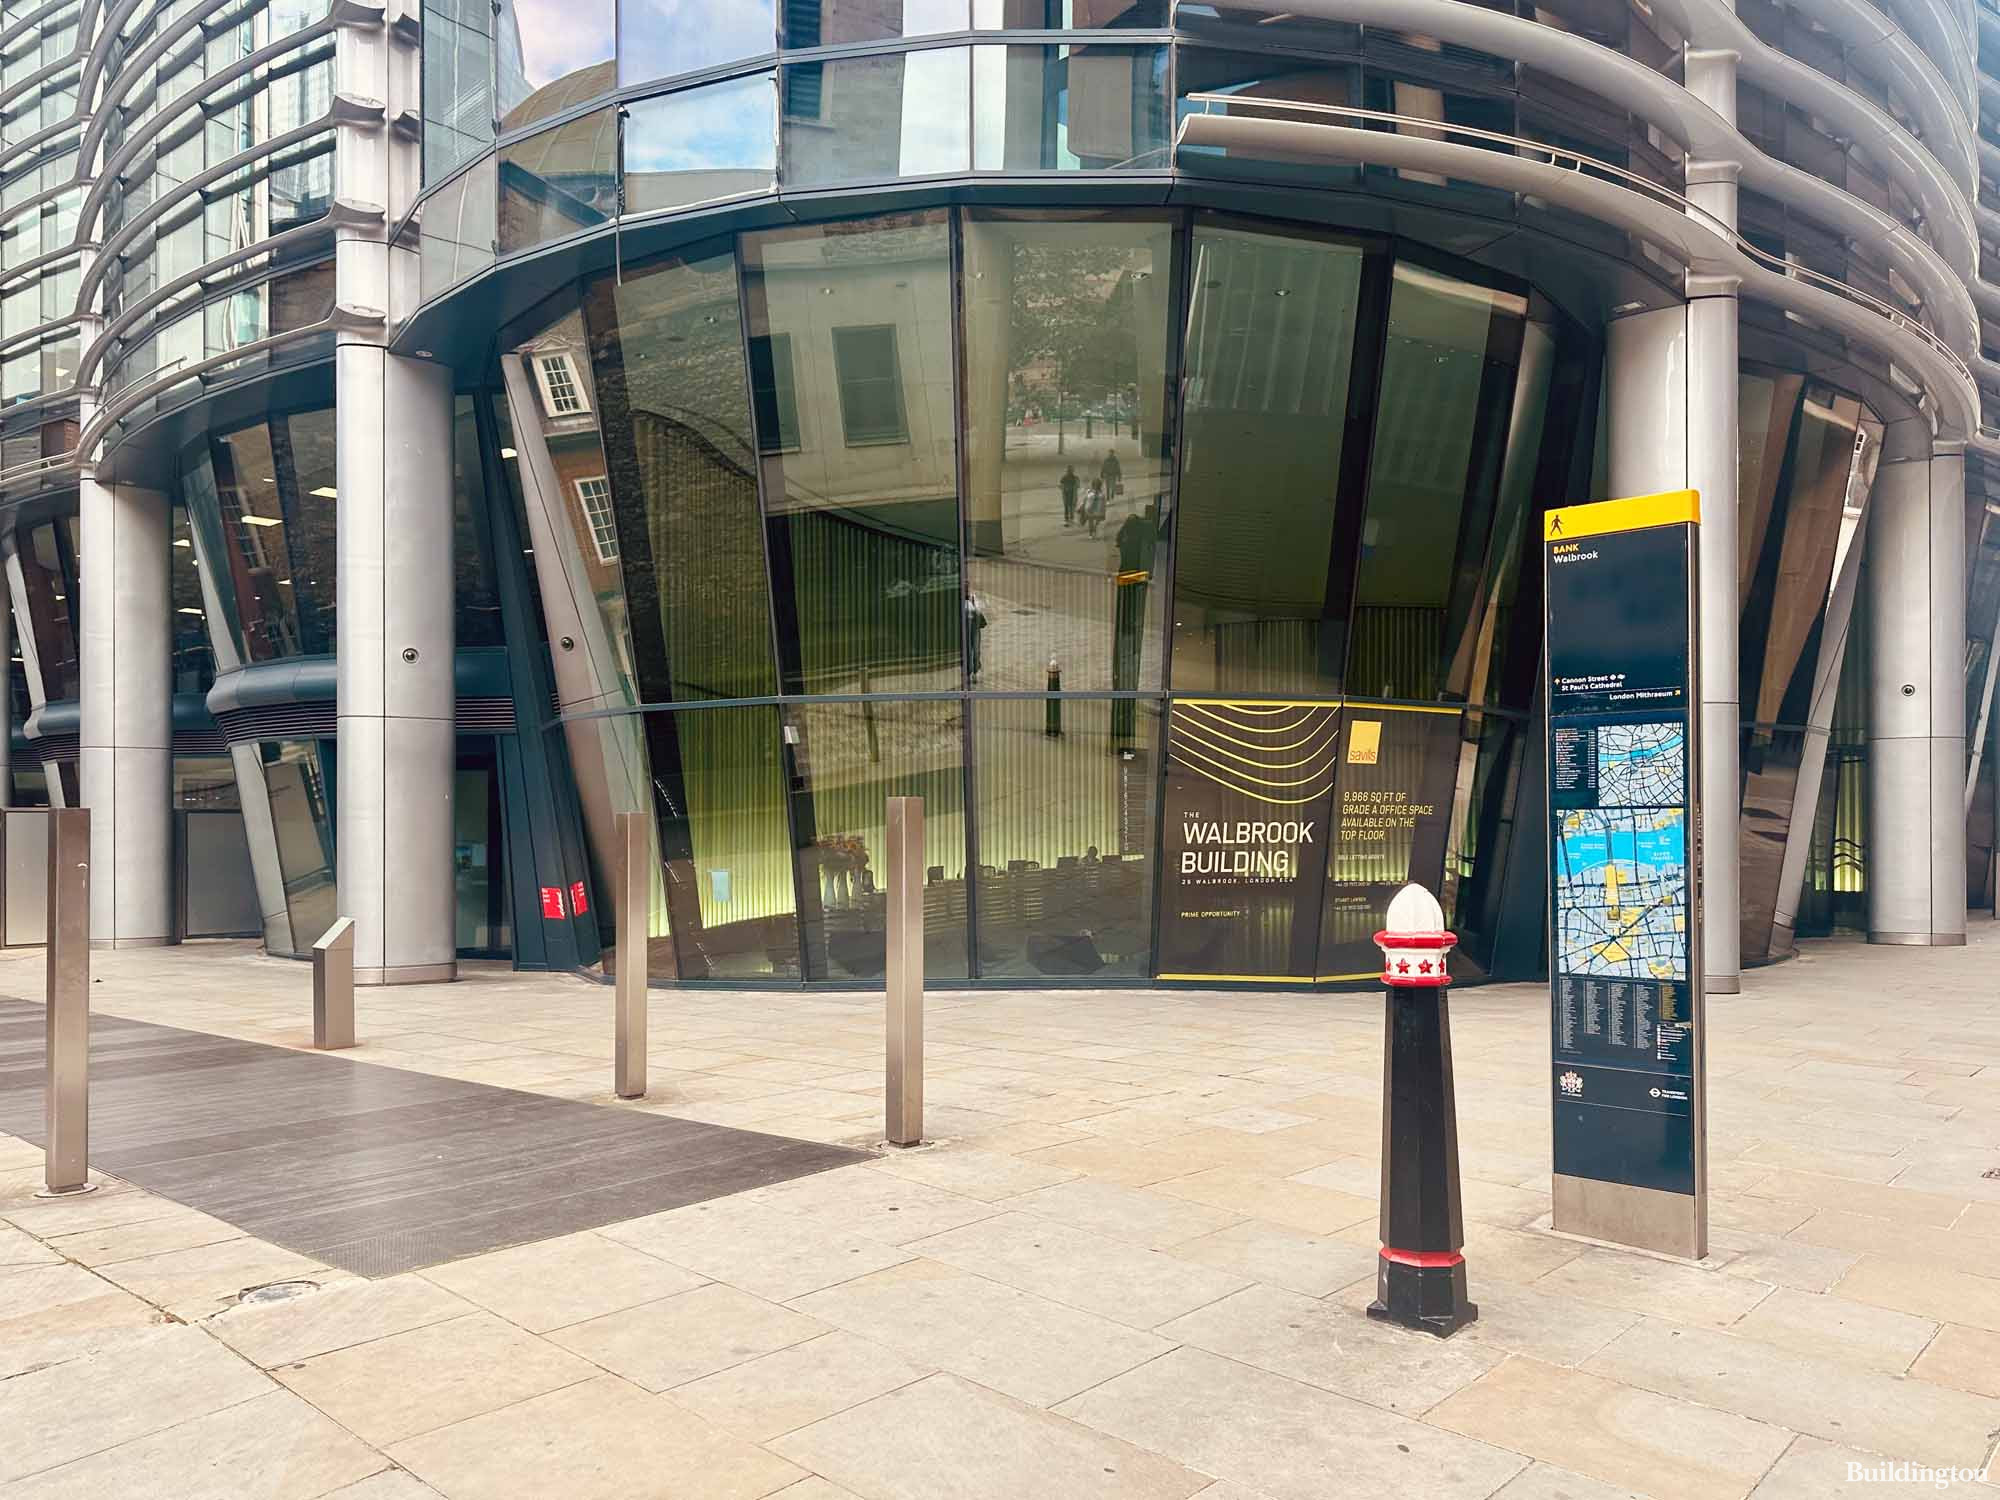 Entrance to Walbrook Building in the City of London EC4